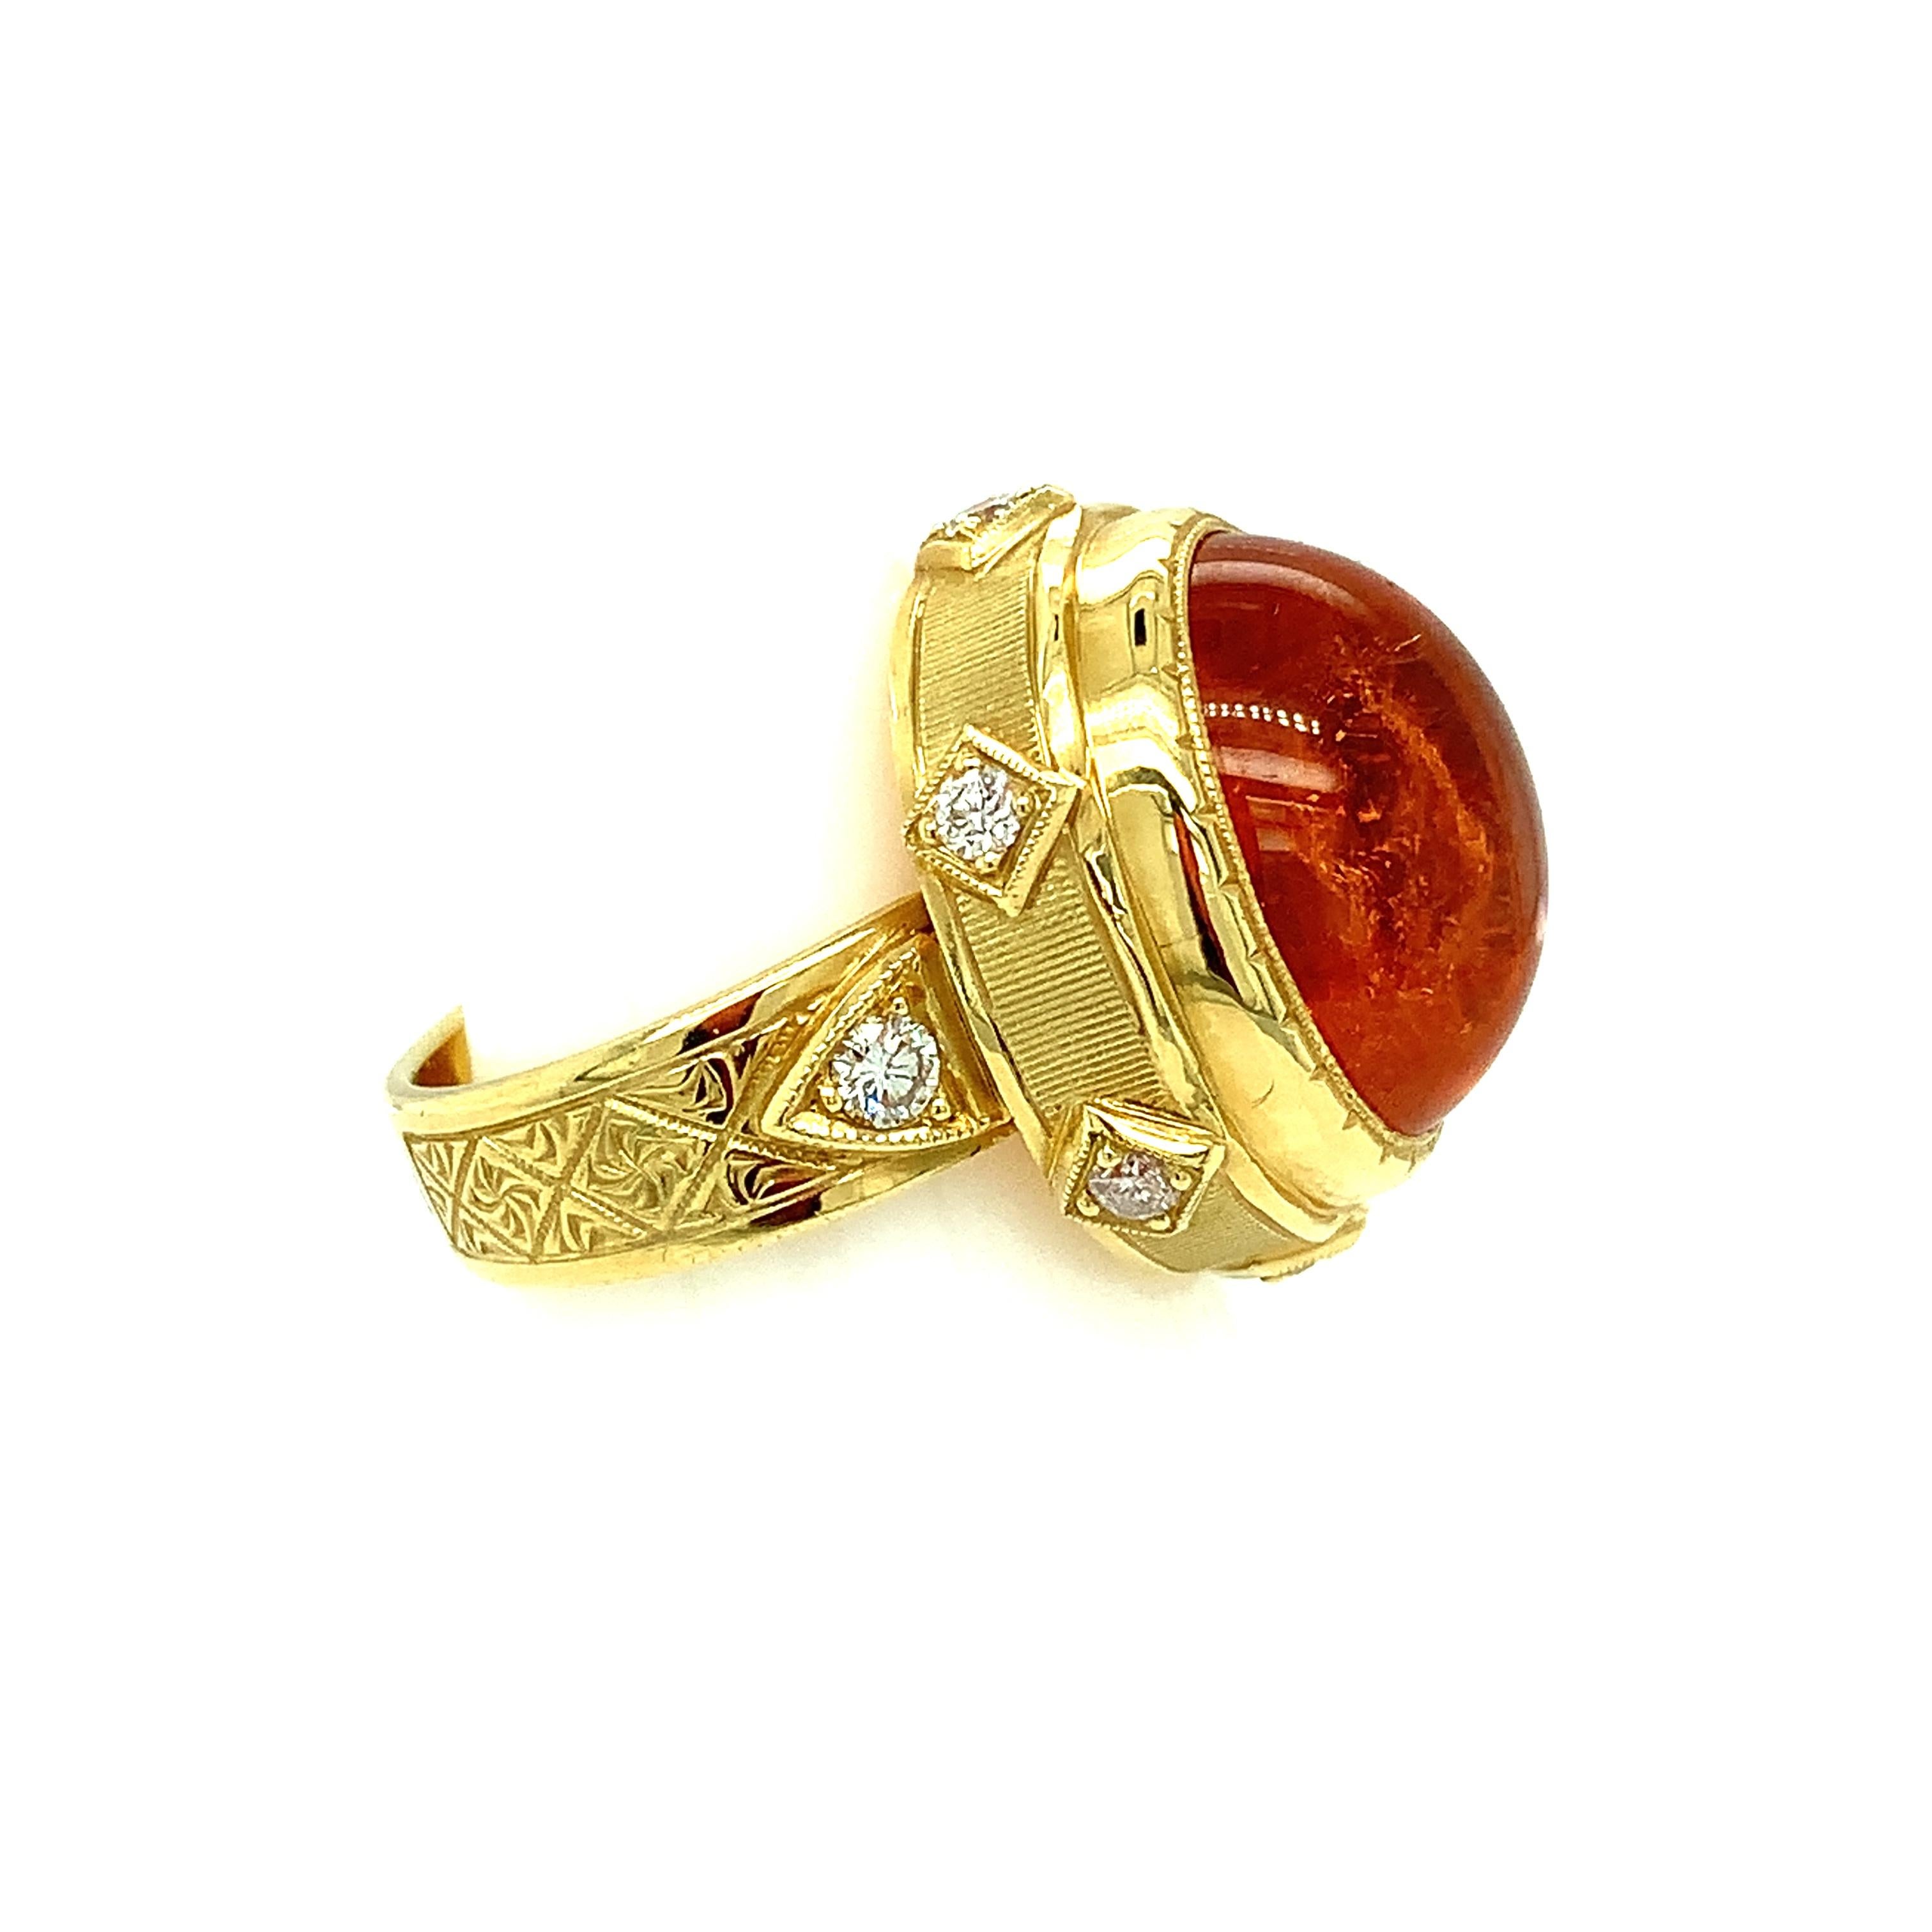 Women's or Men's 24.39 Carat Spessartite Garnet Cabochon and Diamond, 18k Yellow Gold Ring For Sale